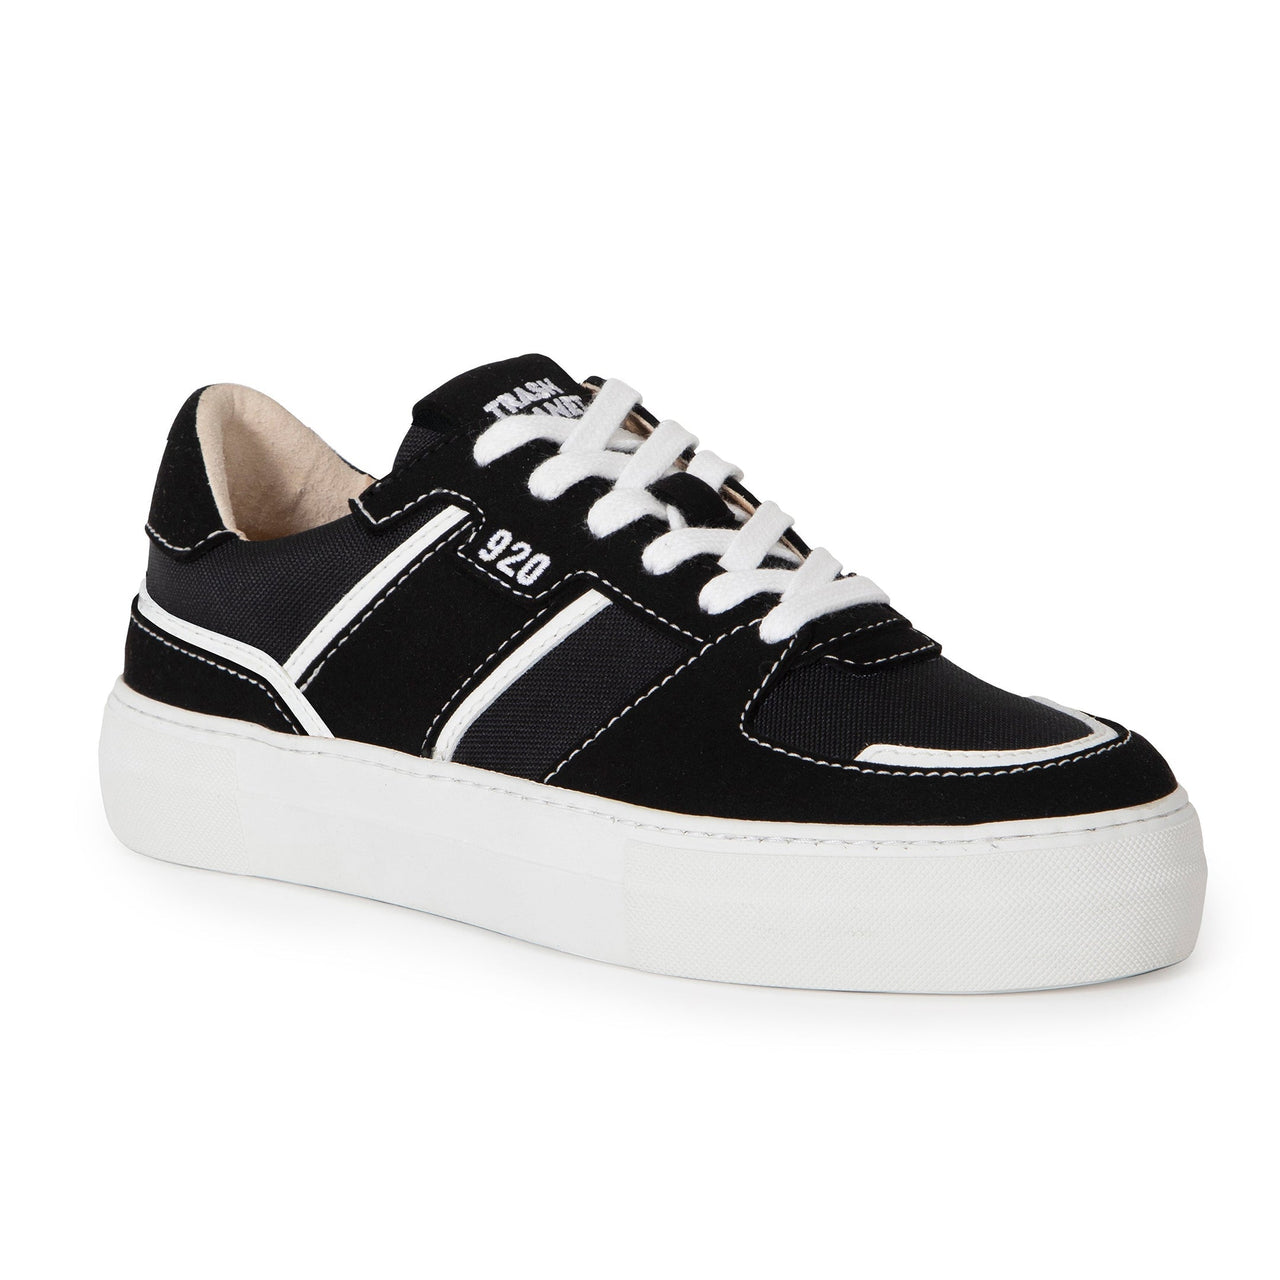 Skate style vegan sneaker in black and white made from recycled plastic bottles, ocean plastic and fruit and vegetable materials